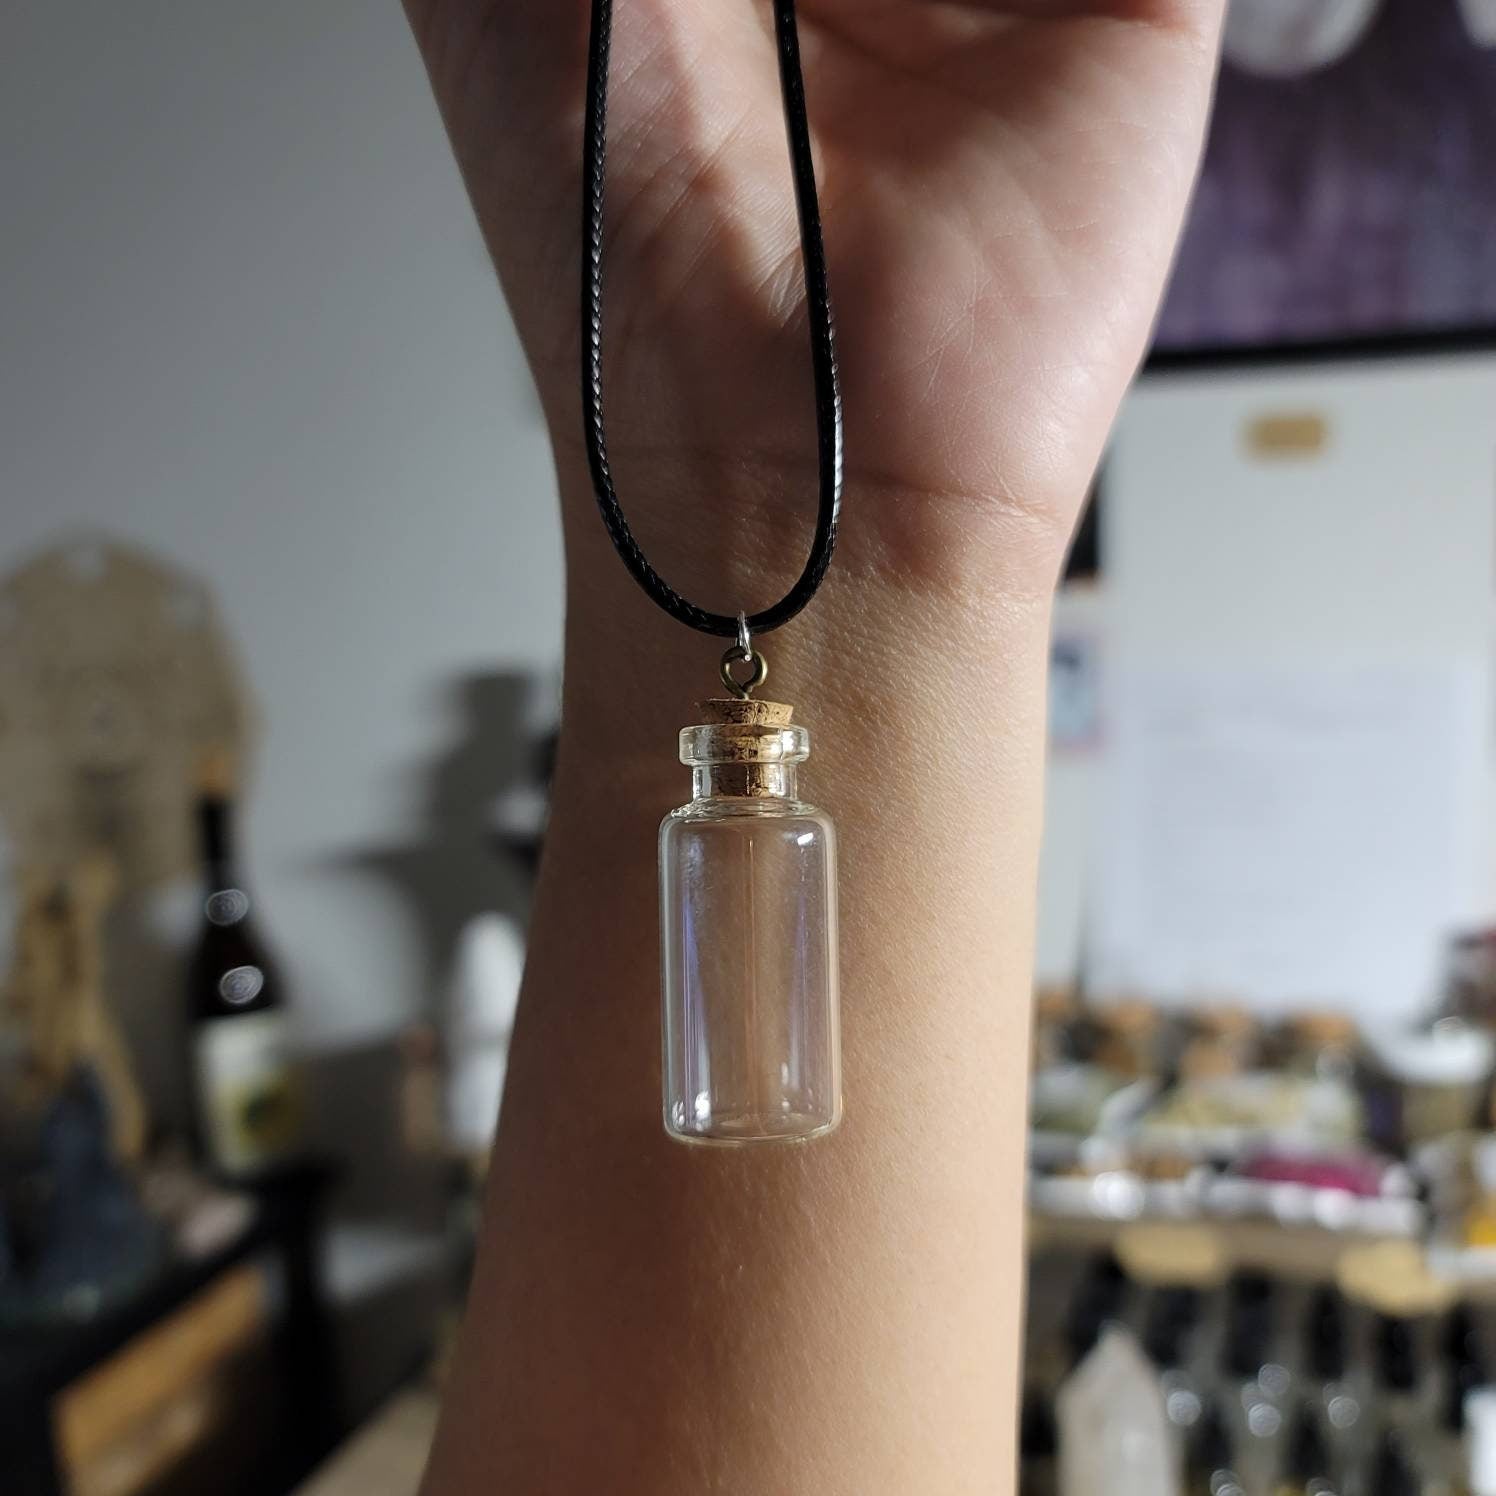 Spell Bottle Necklace - inspire intentions and desires - Spell Jars and Witch Bottles - Ritual & Spell Jewelry